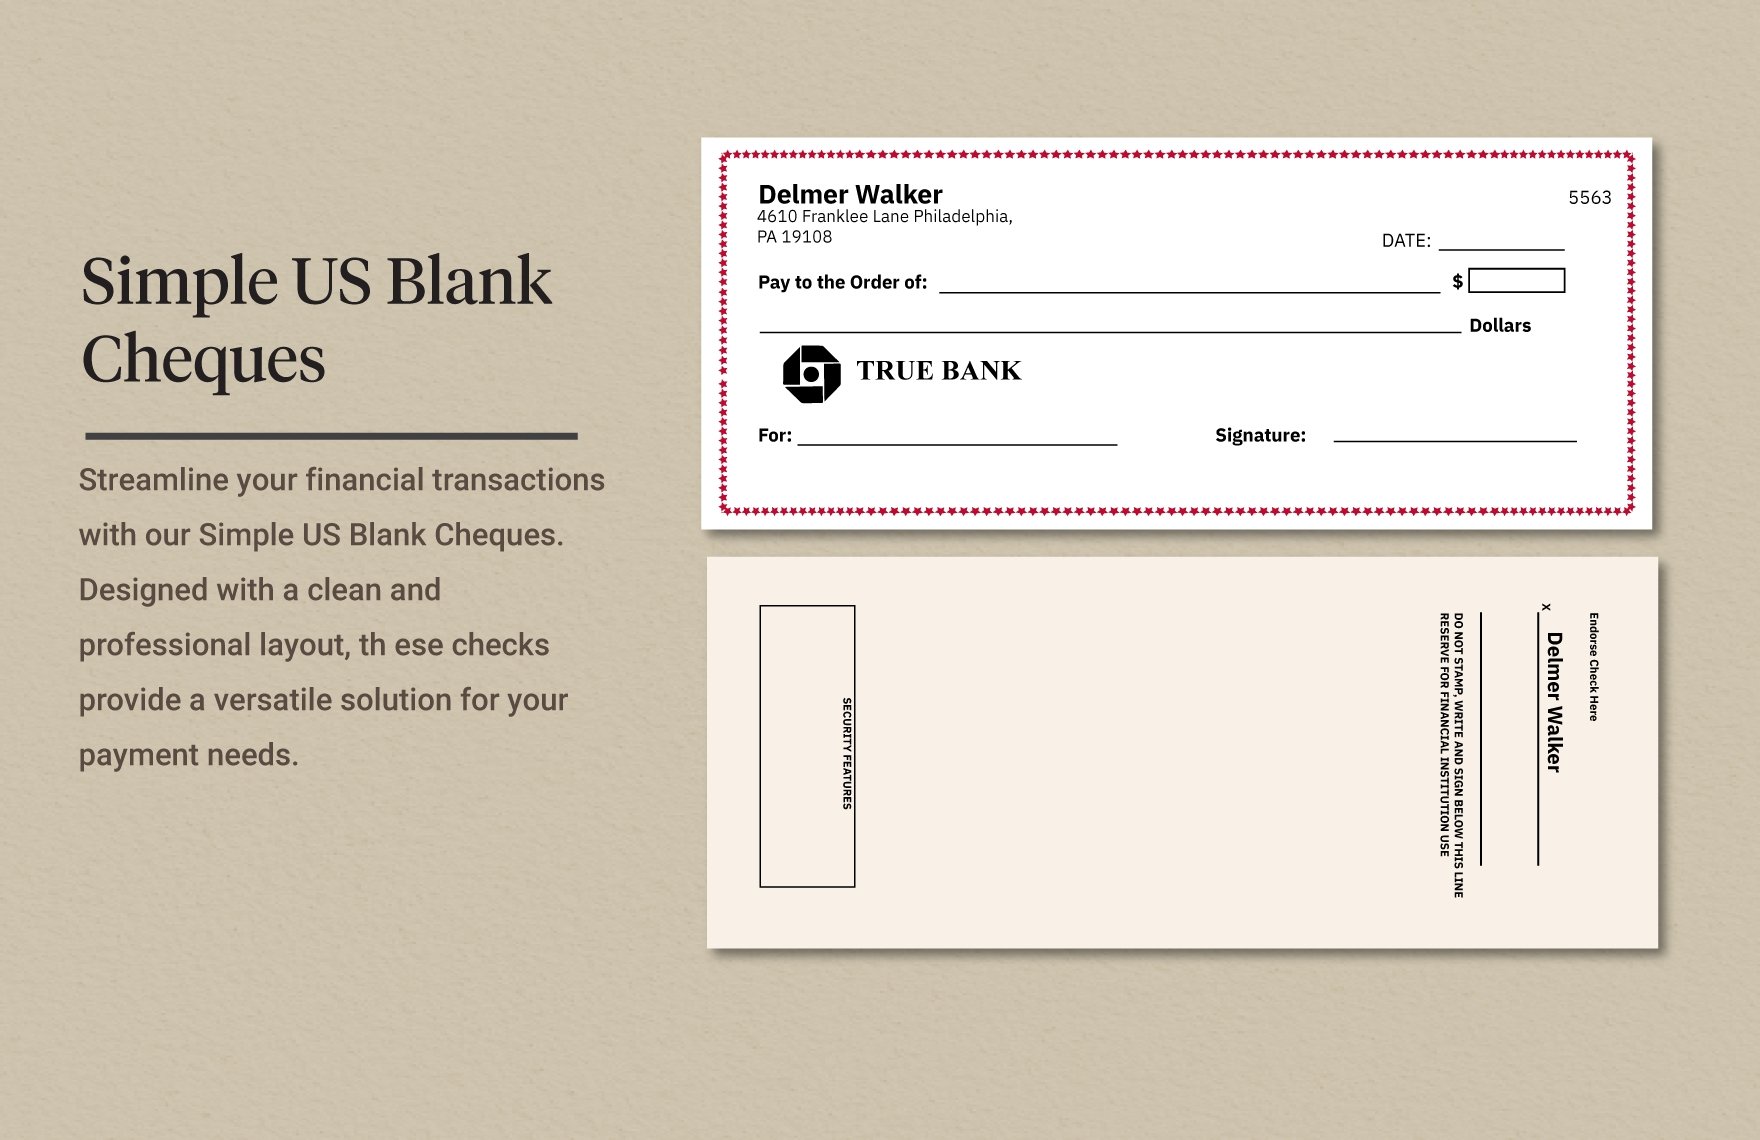 simple us blank cheques